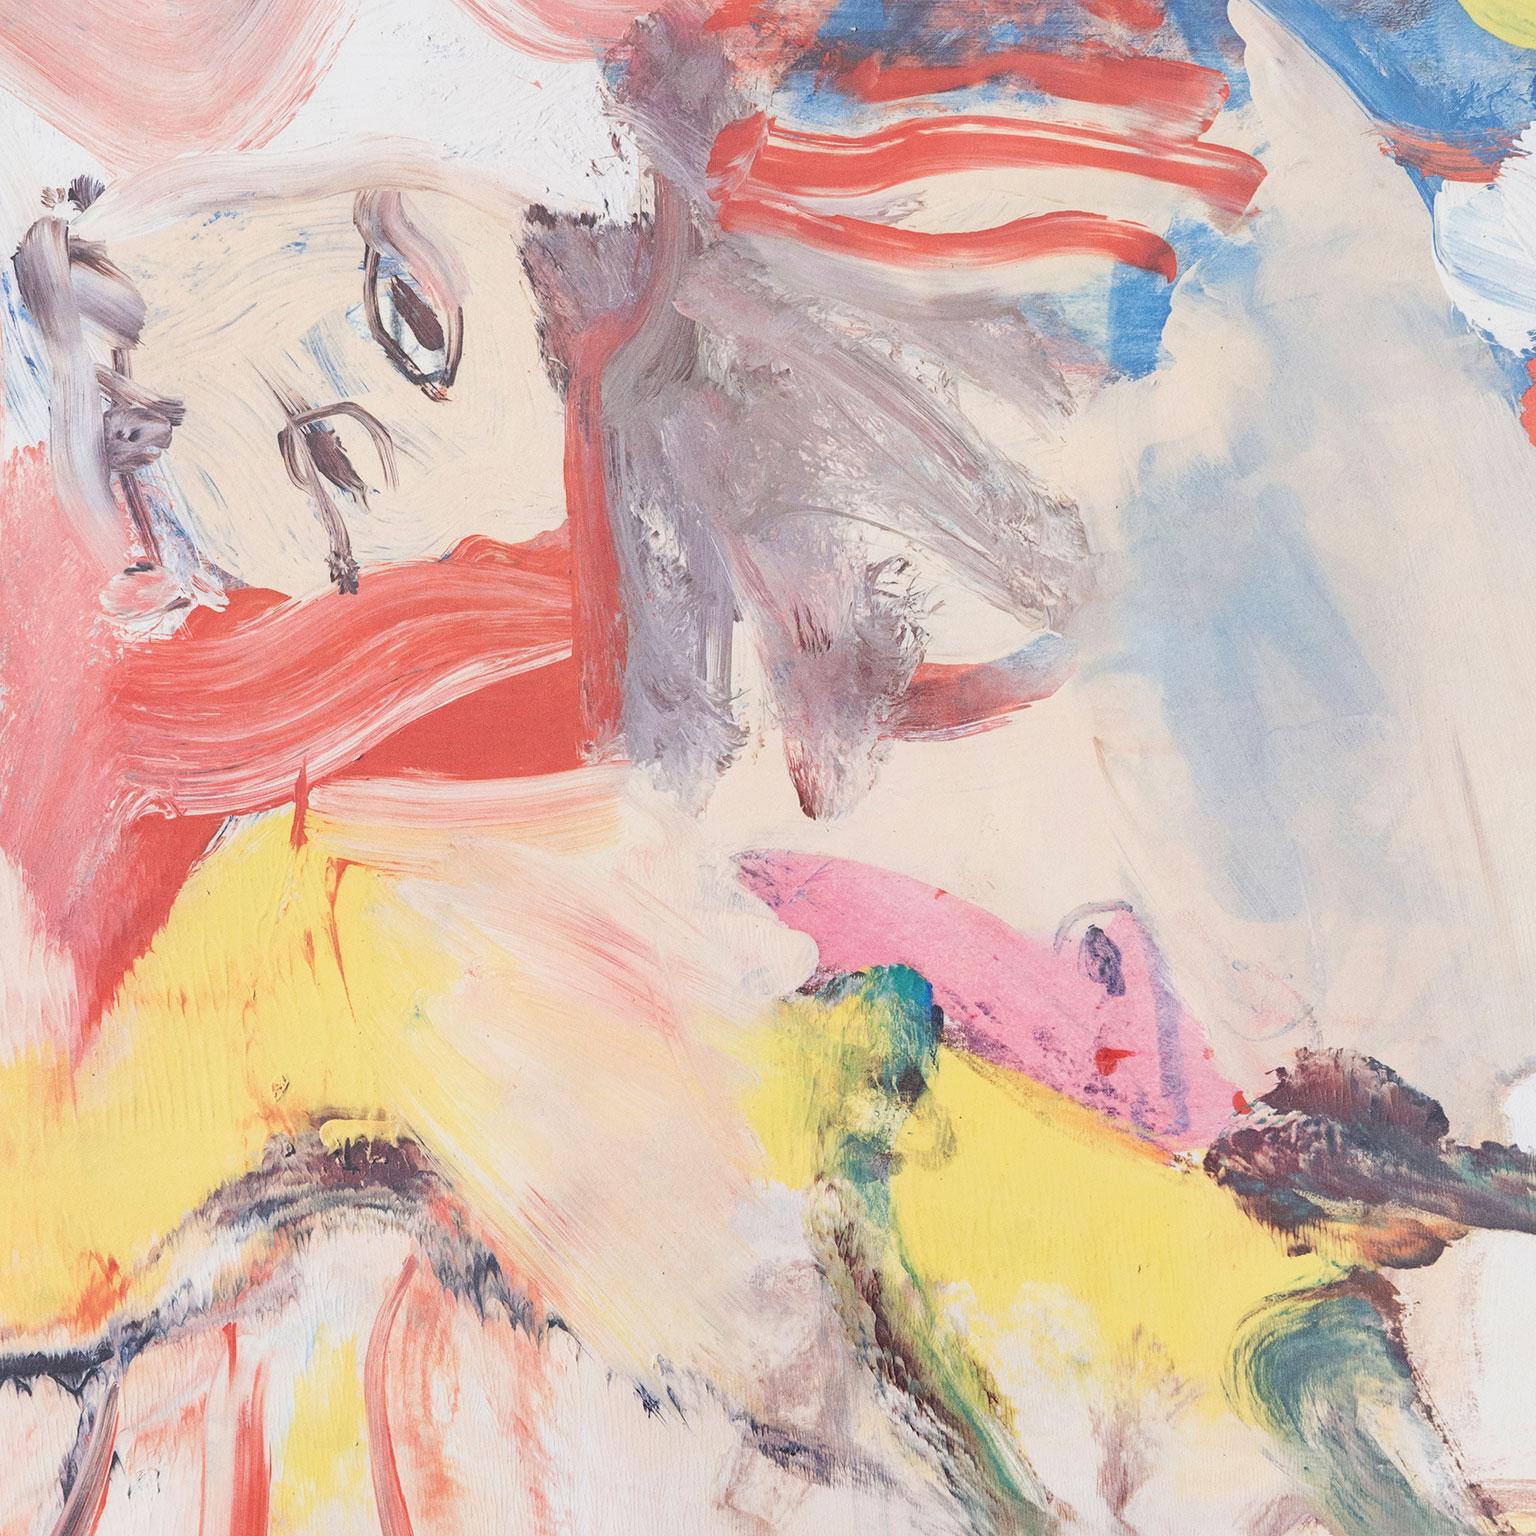 Willem De Kooning (1904-1997) was, alongside Jackson Pollock, the torchbearer of postwar American abstraction and one of the most important artists of the 20th century. 

With a career spanning nearly seven decades, De Kooning's oeuvre is marked by